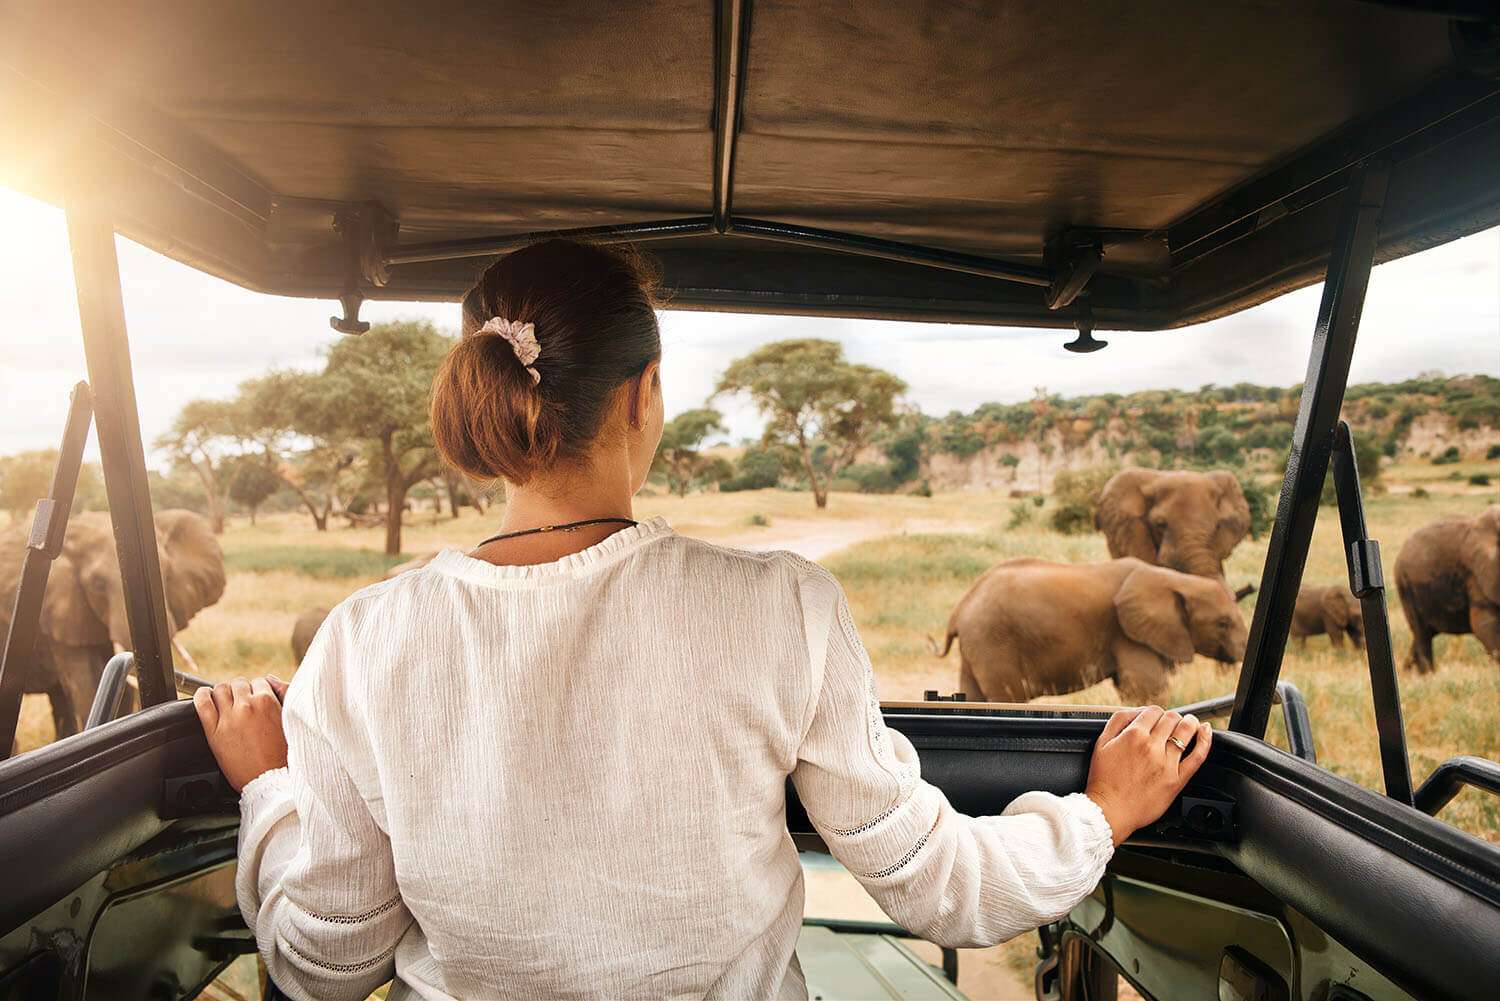 Lady looking at elephants